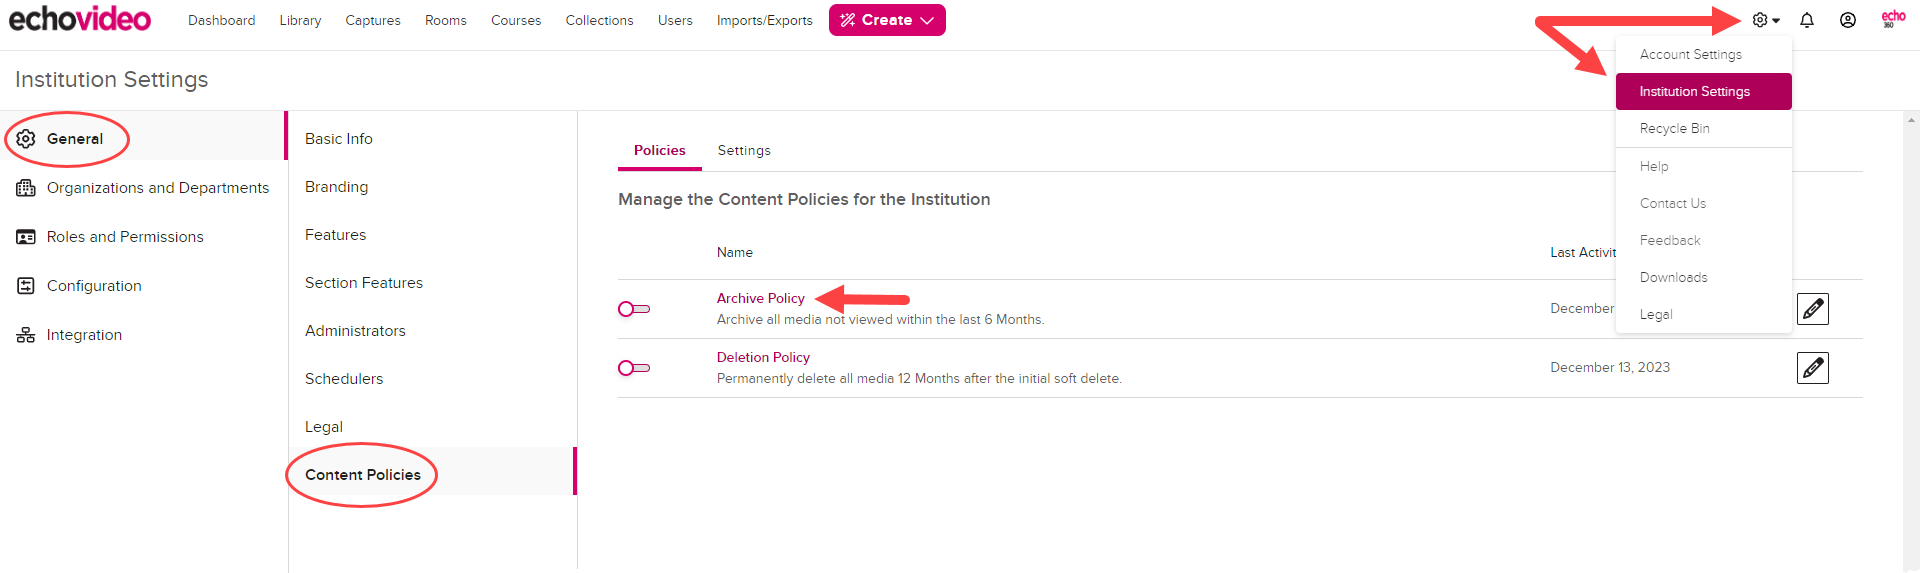 Institution Settings open to Content Policies with Archive toggle disabled as shown by the steps described